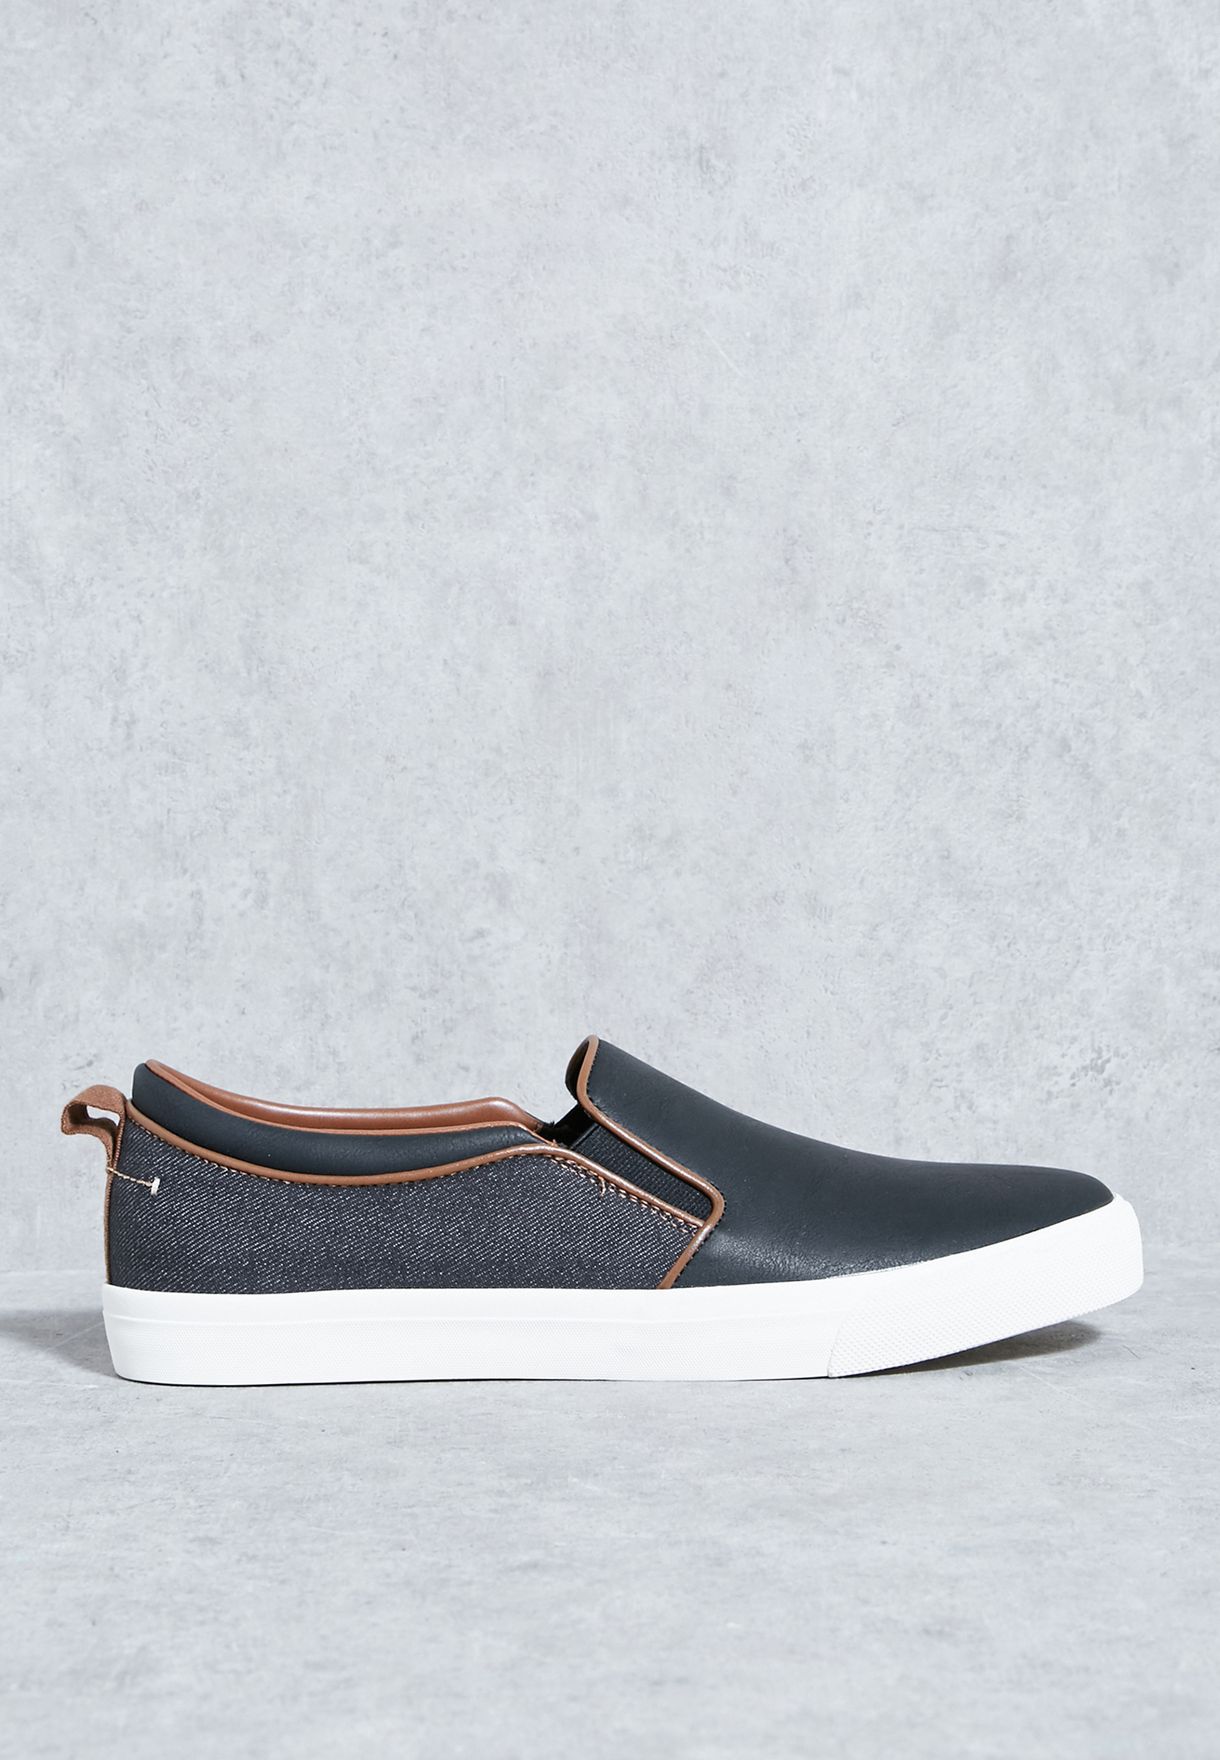 sports loafer shoes